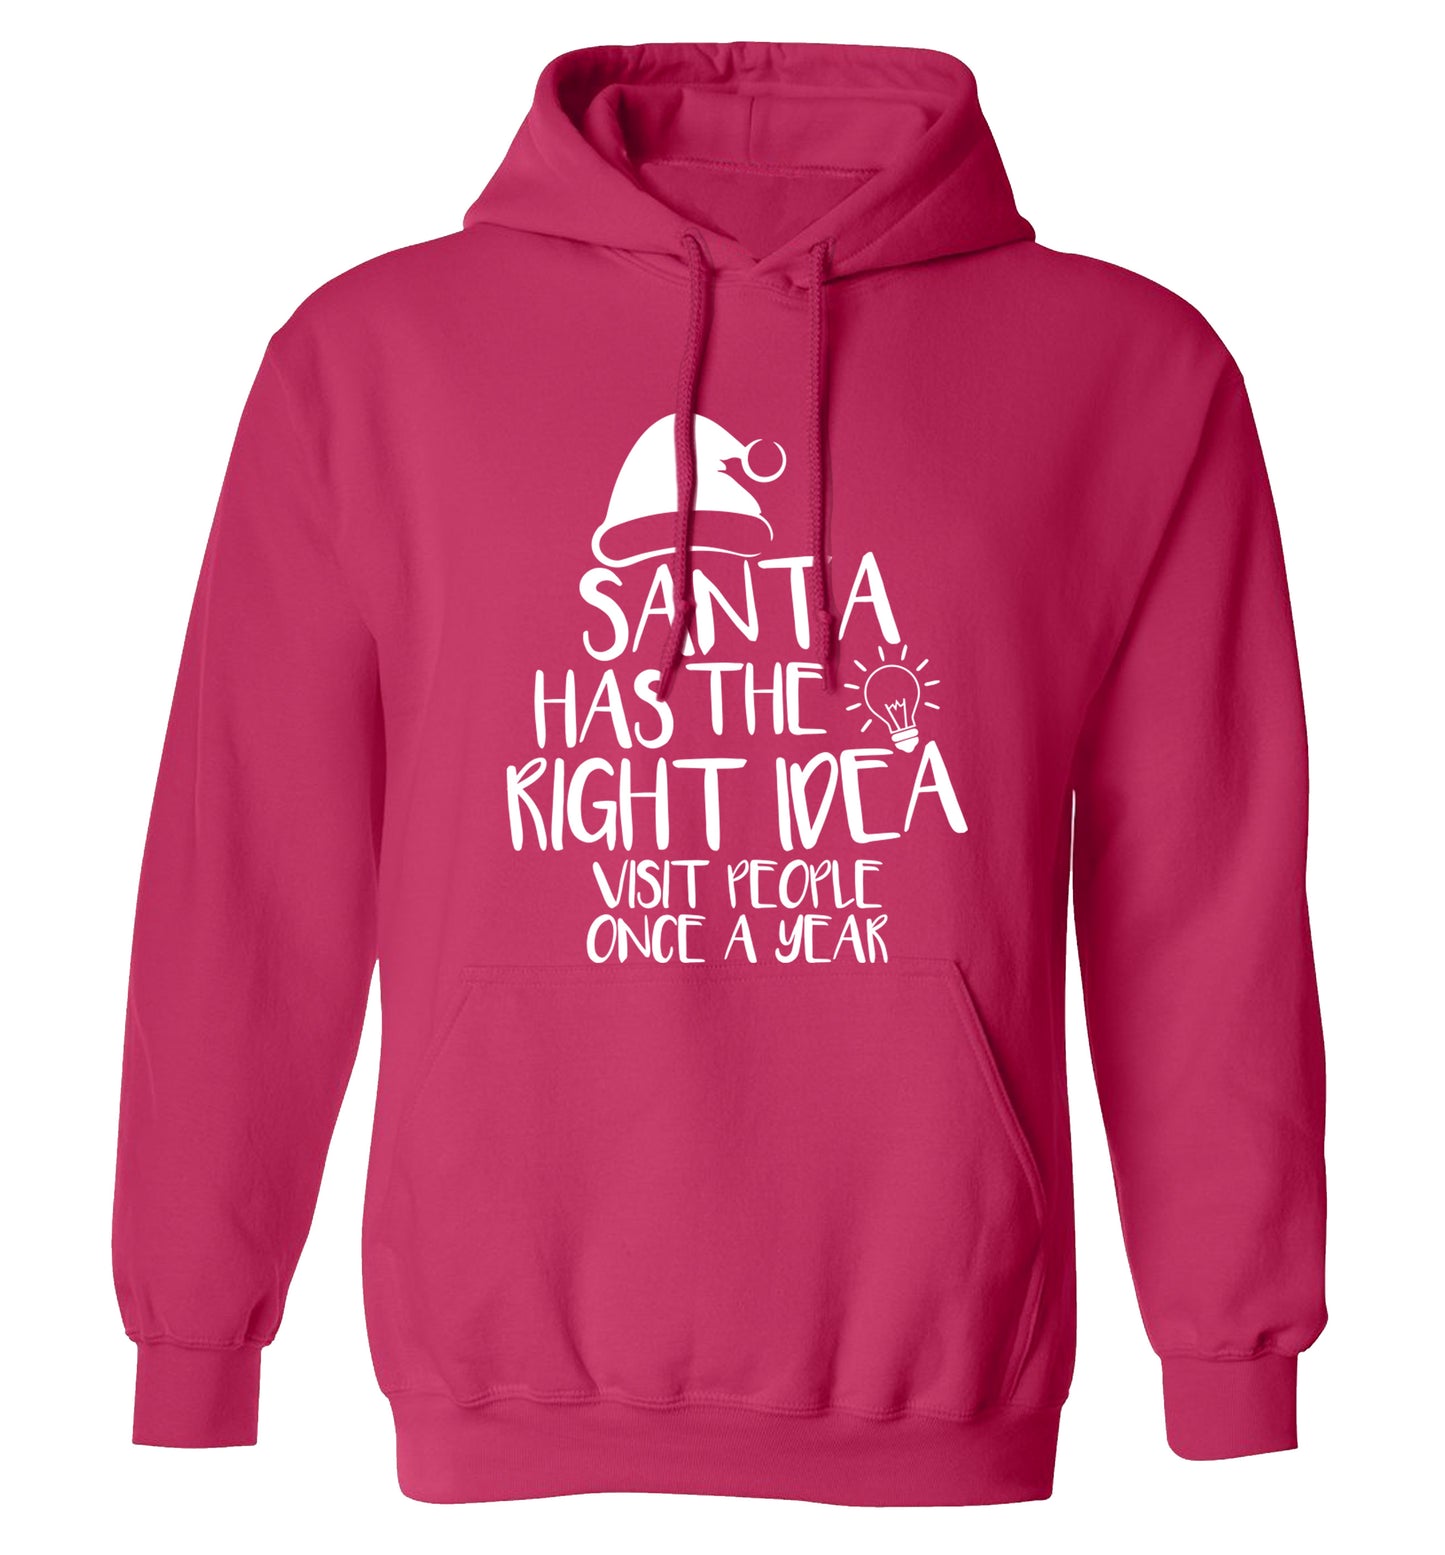 Santa has the right idea visit people once a year adults unisex pink hoodie 2XL